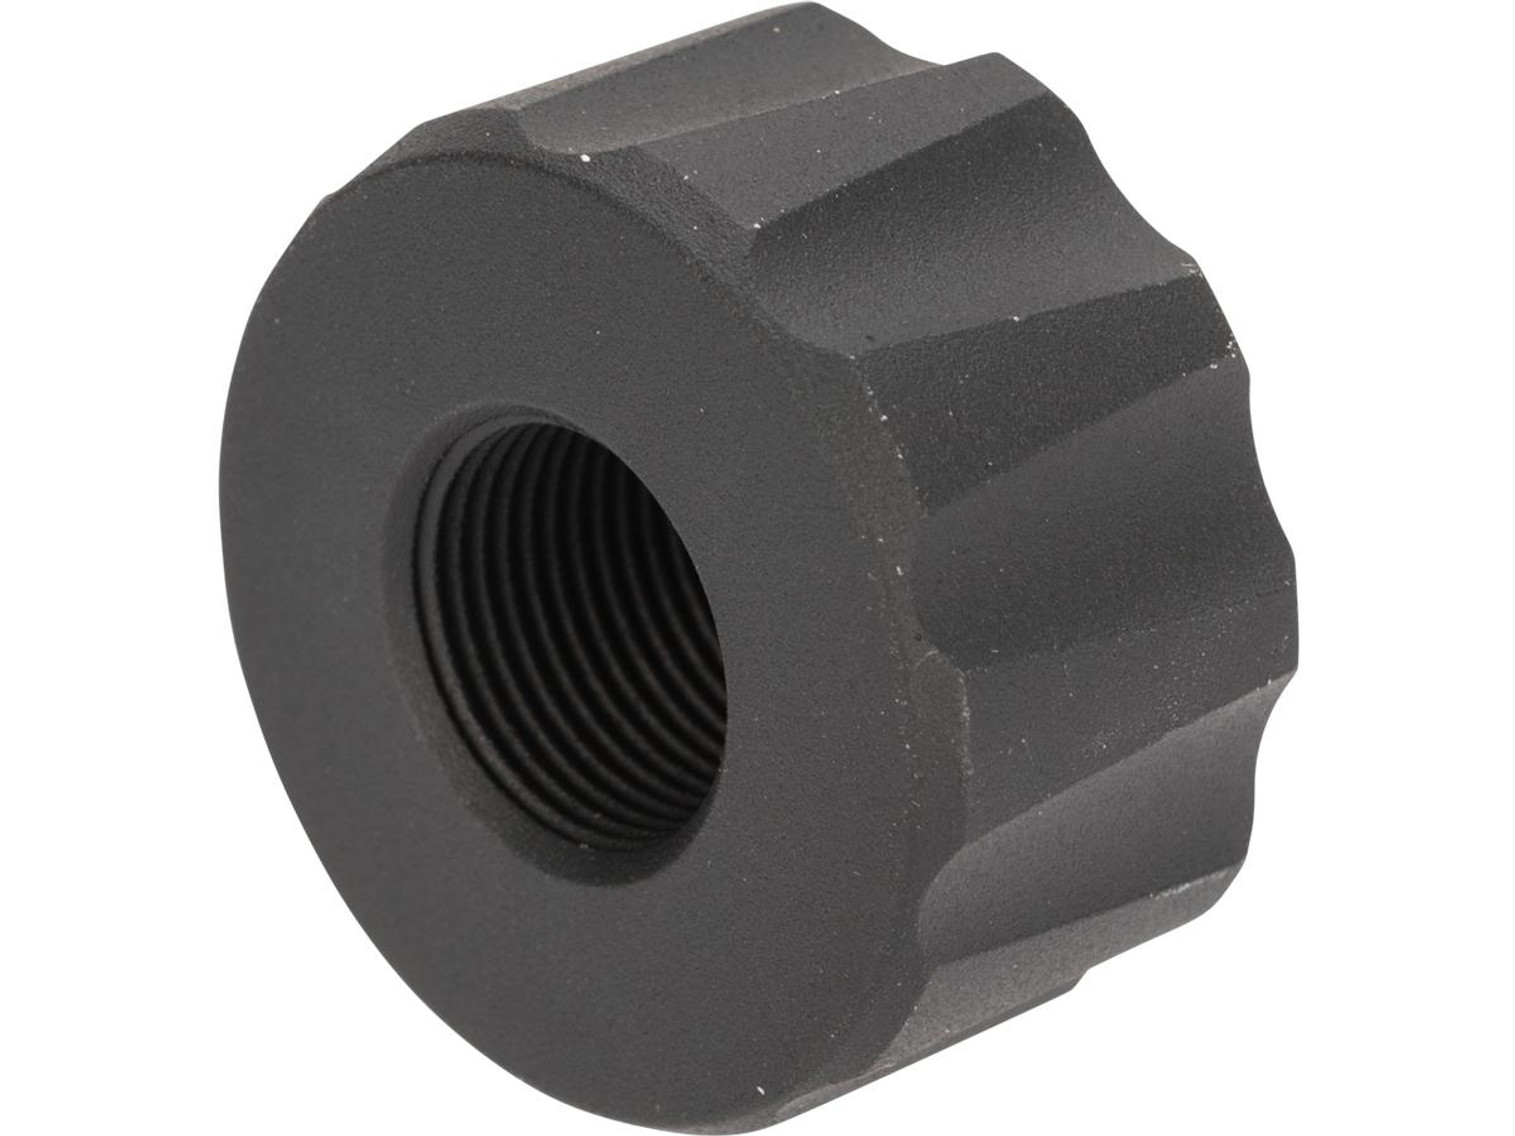 12mm to 14mm Thread Adapter for Battle Owl Tracer Unit